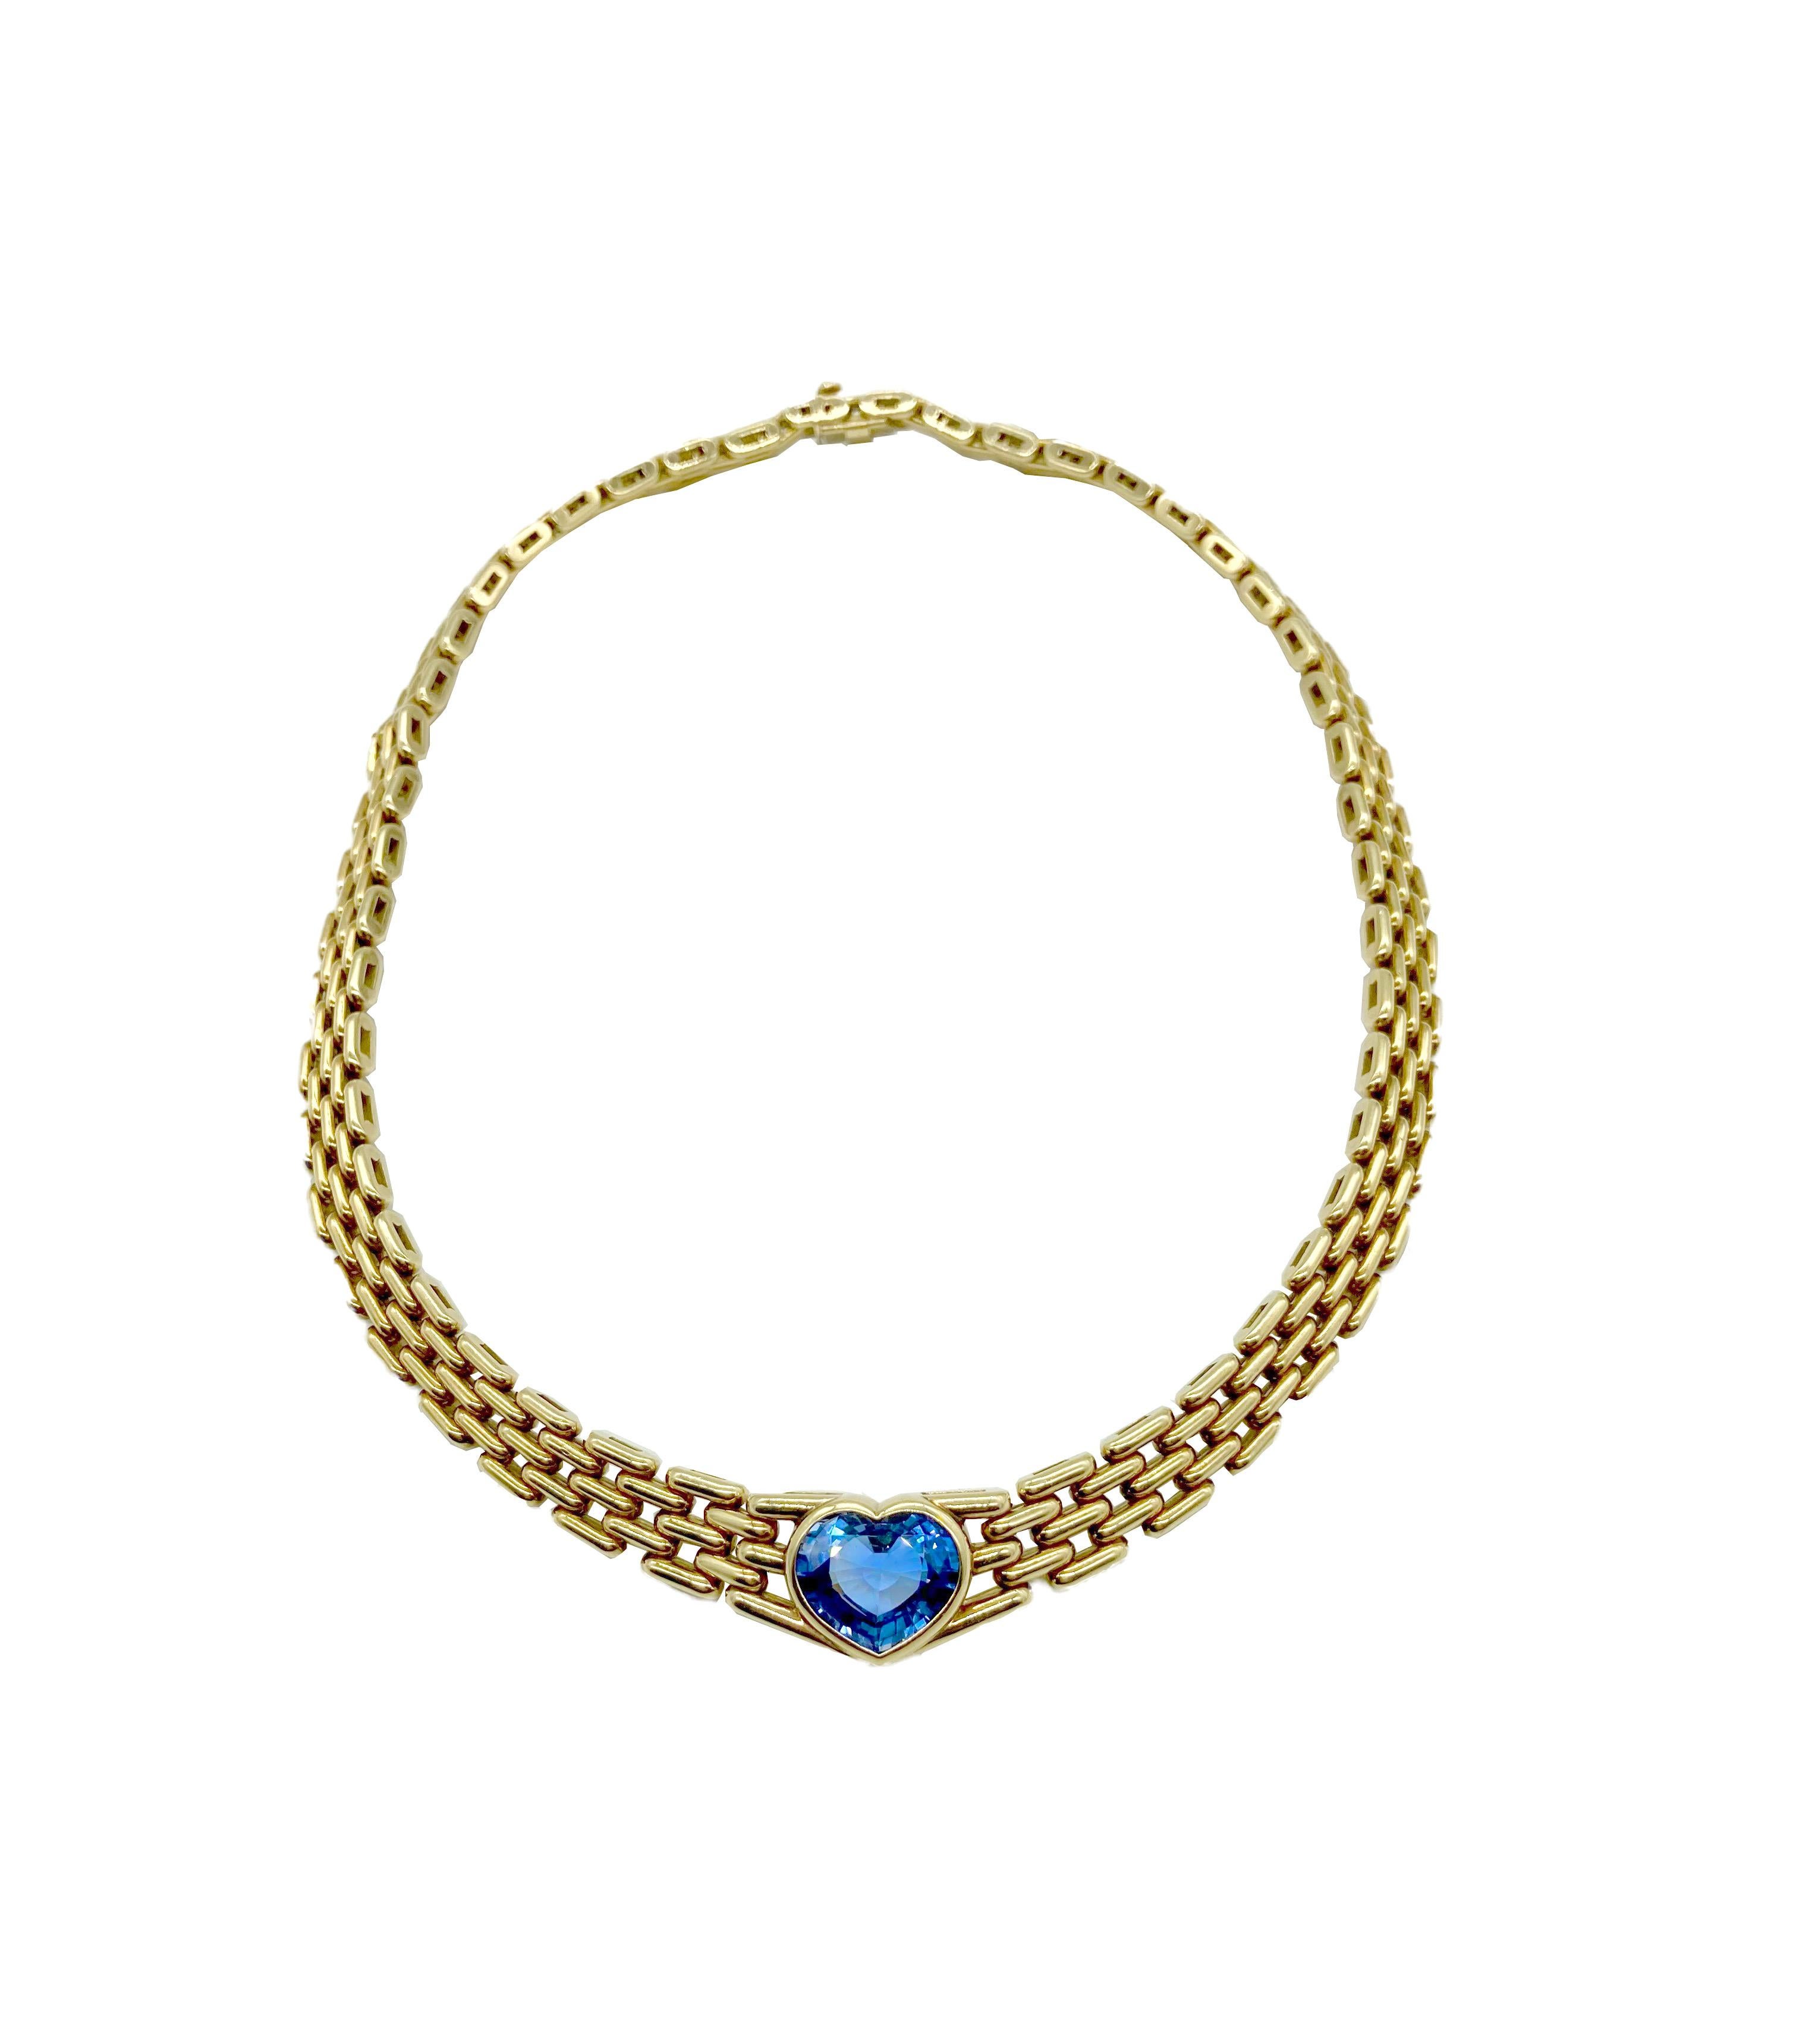 Vintage Inspired Diamond and Pear Sapphire Necklace in 18k Gold